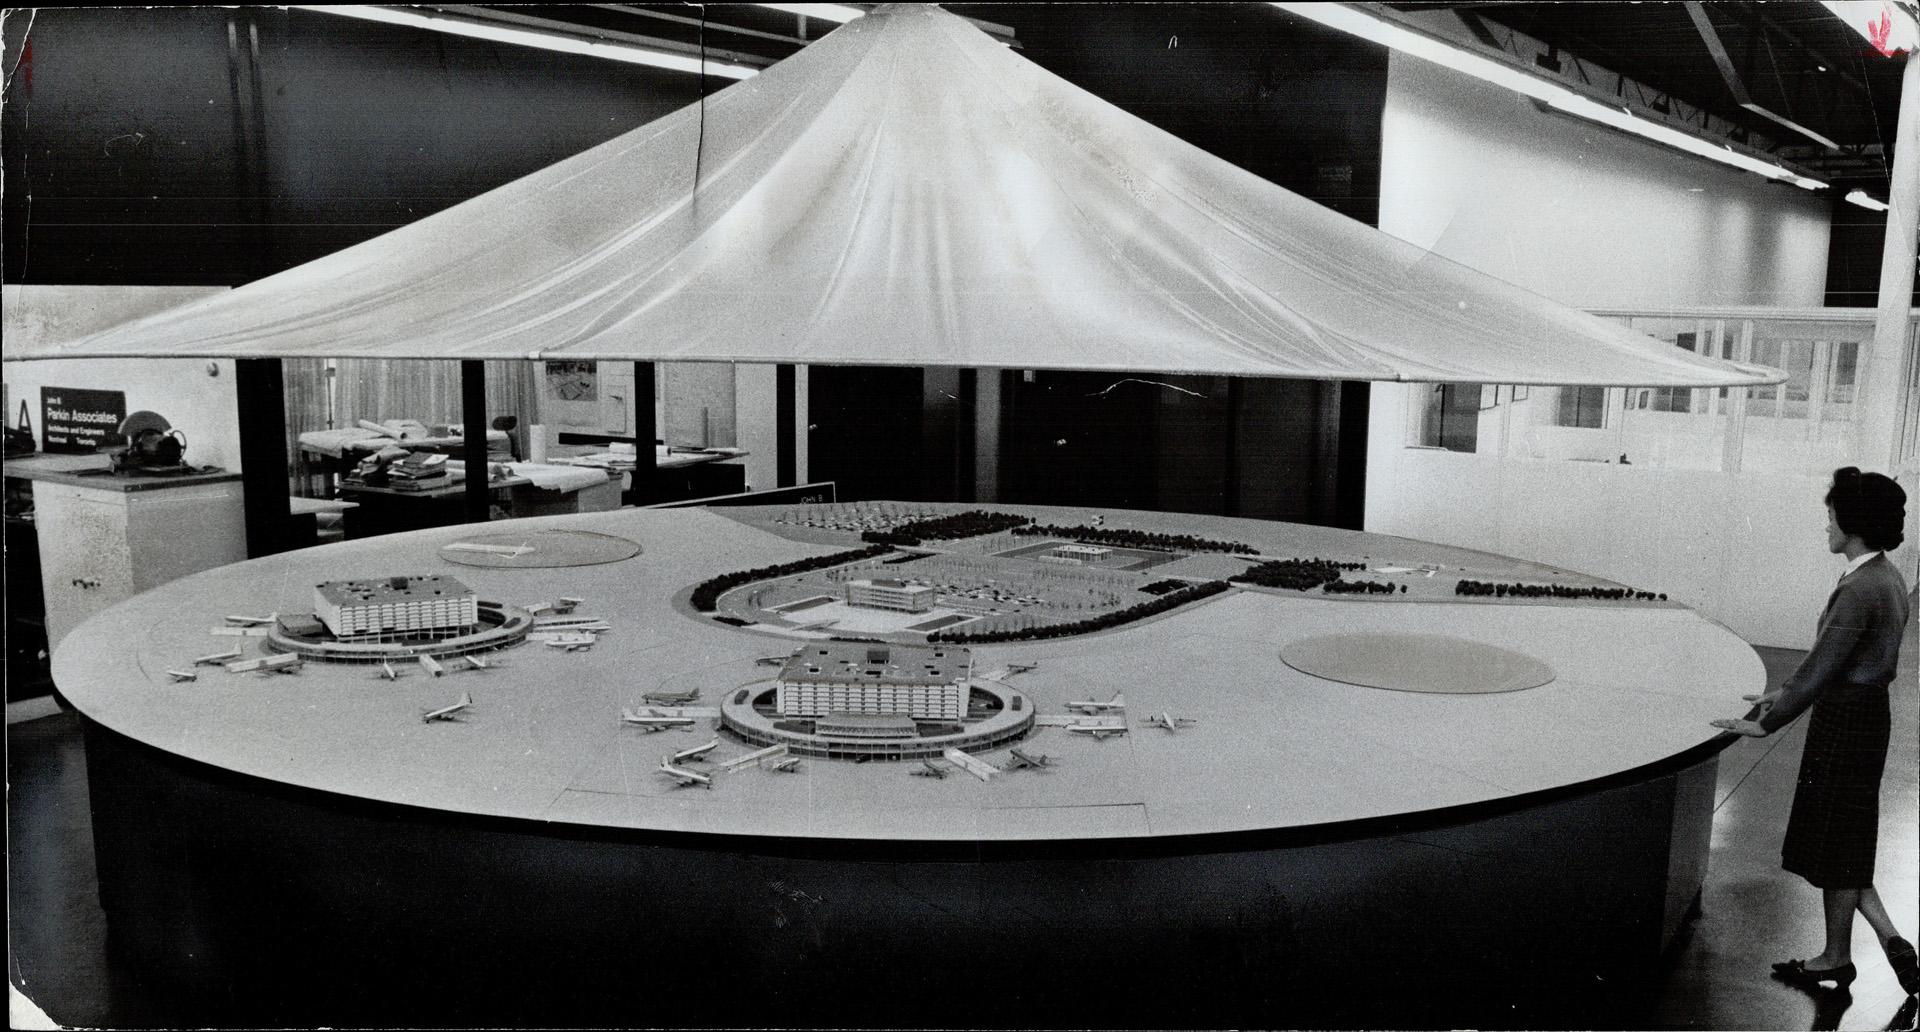 Mrs. M. Kwan studies model of Toronto's new international airport which goes into operation Jan 12, Circular building at left is second aeroquay plann(...)